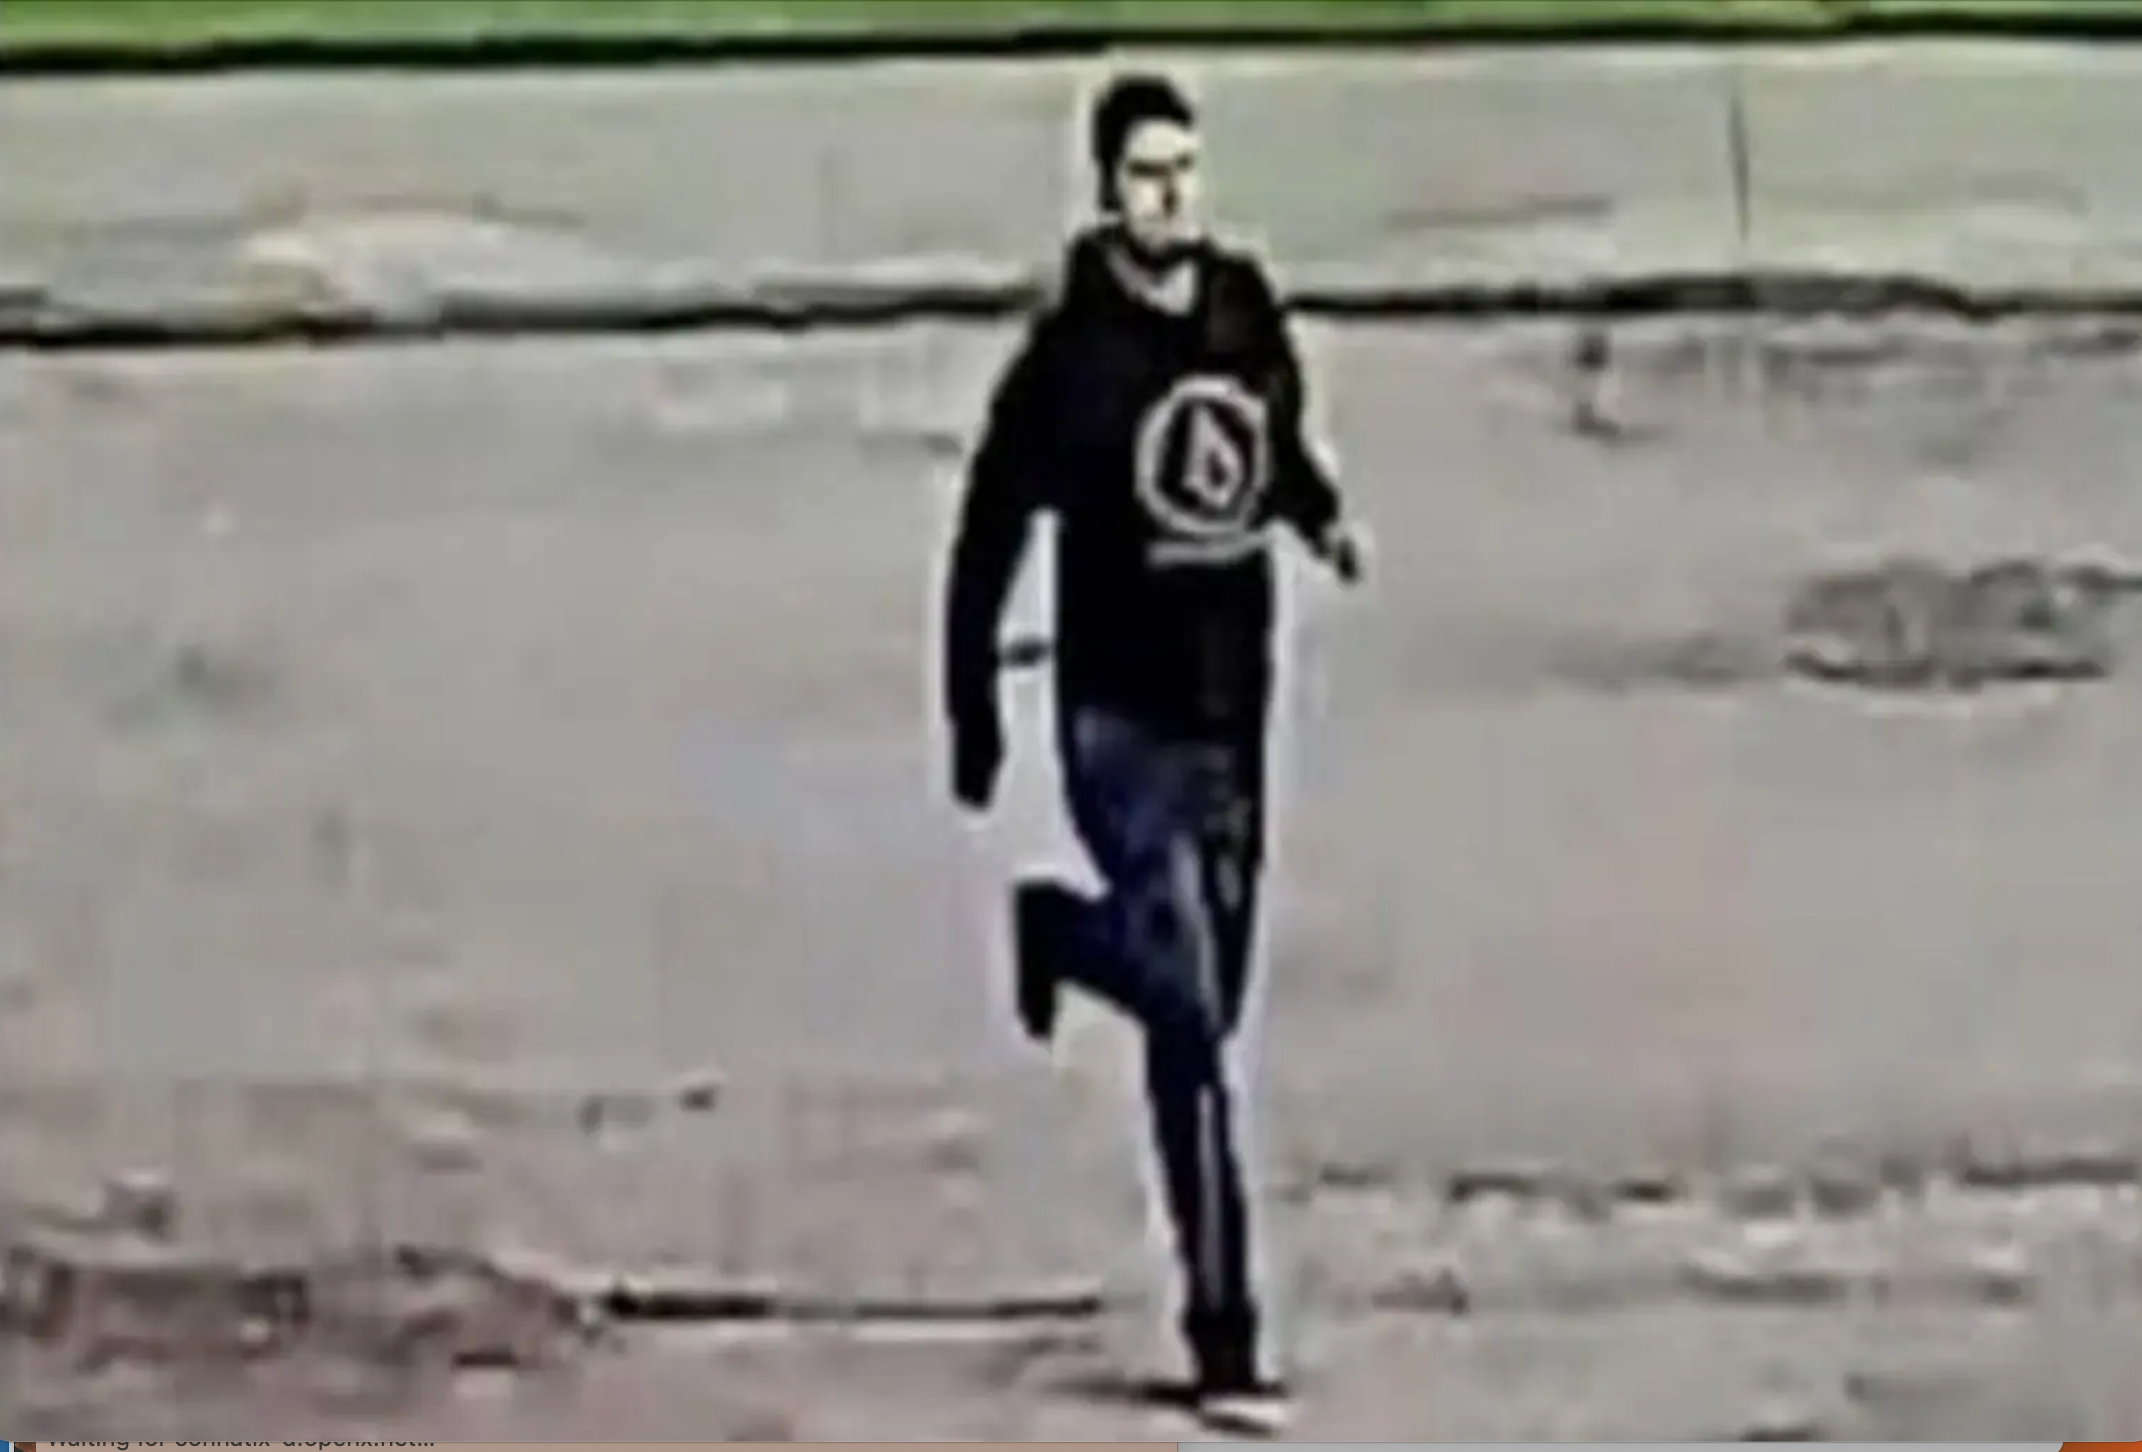 Edna Police released chilling images of the person of interest following the teen’s death